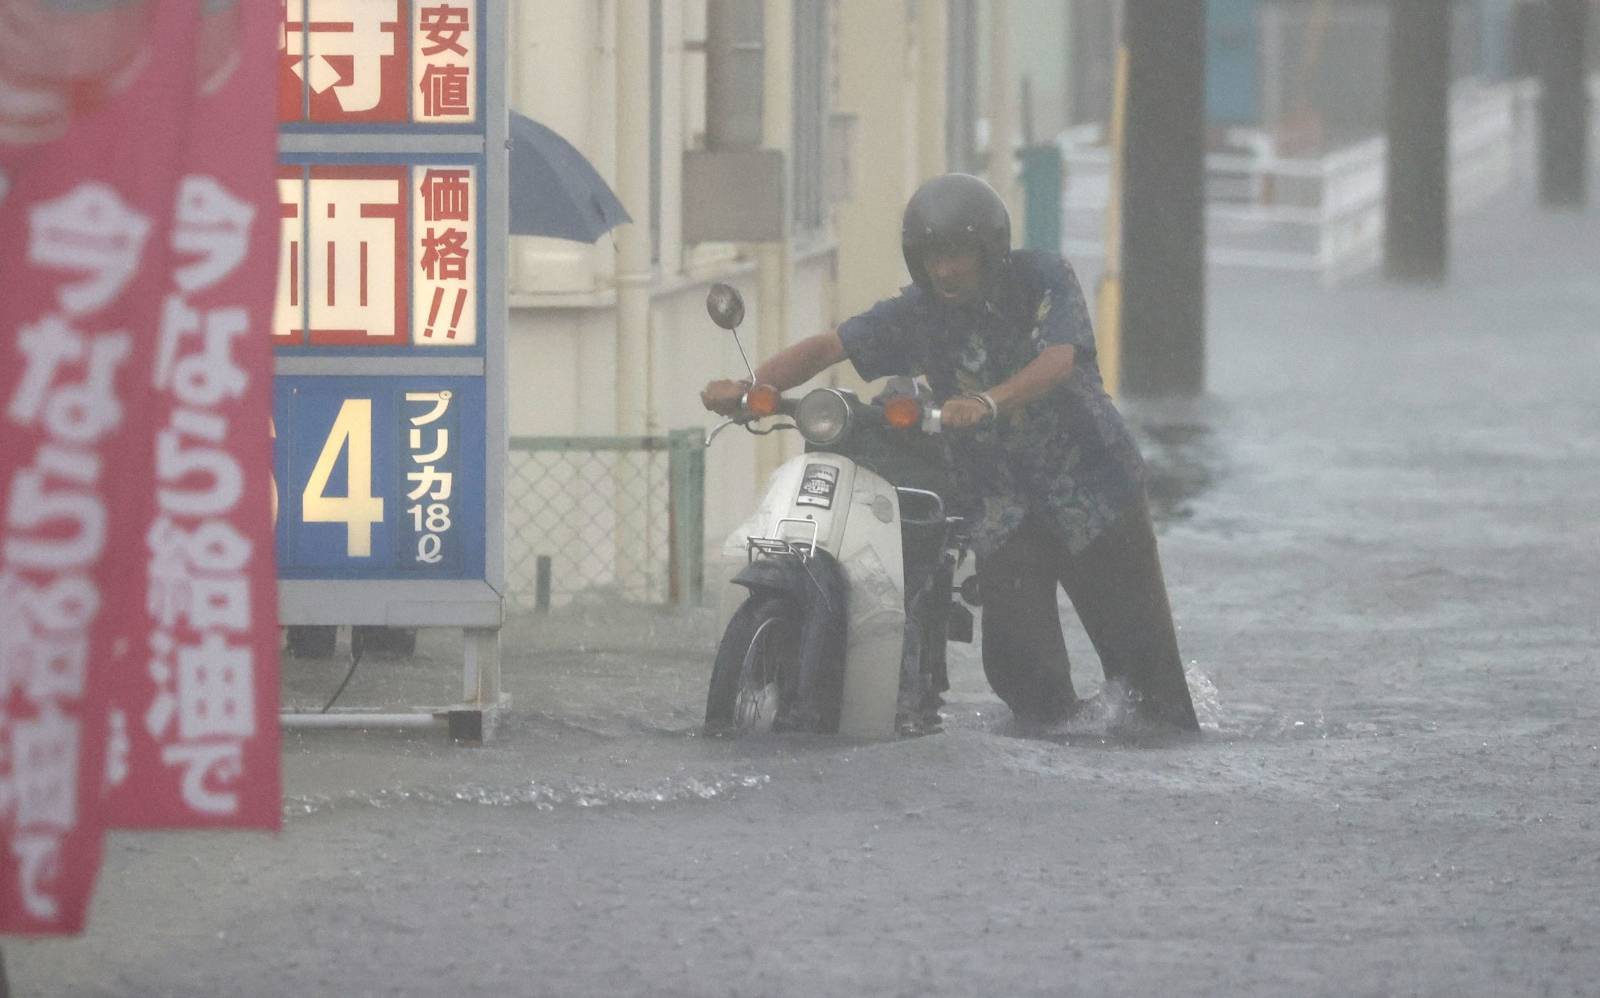 A man pushes a motorbike in a road flooded by heavy rain in Kurume, Japan